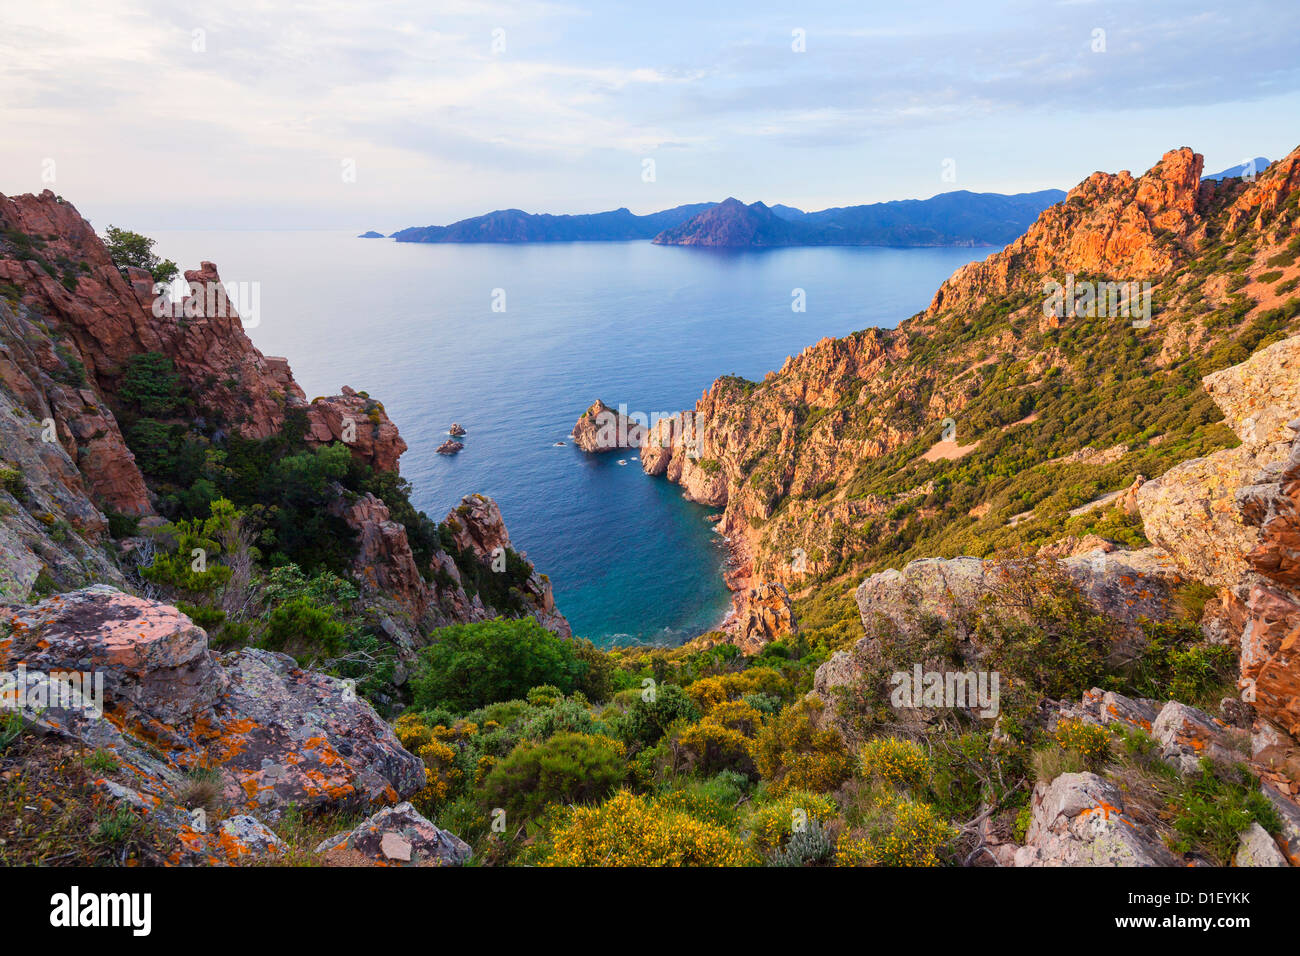 Sunset at the Capo Rosso, Corsica, France Stock Photo - Alamy